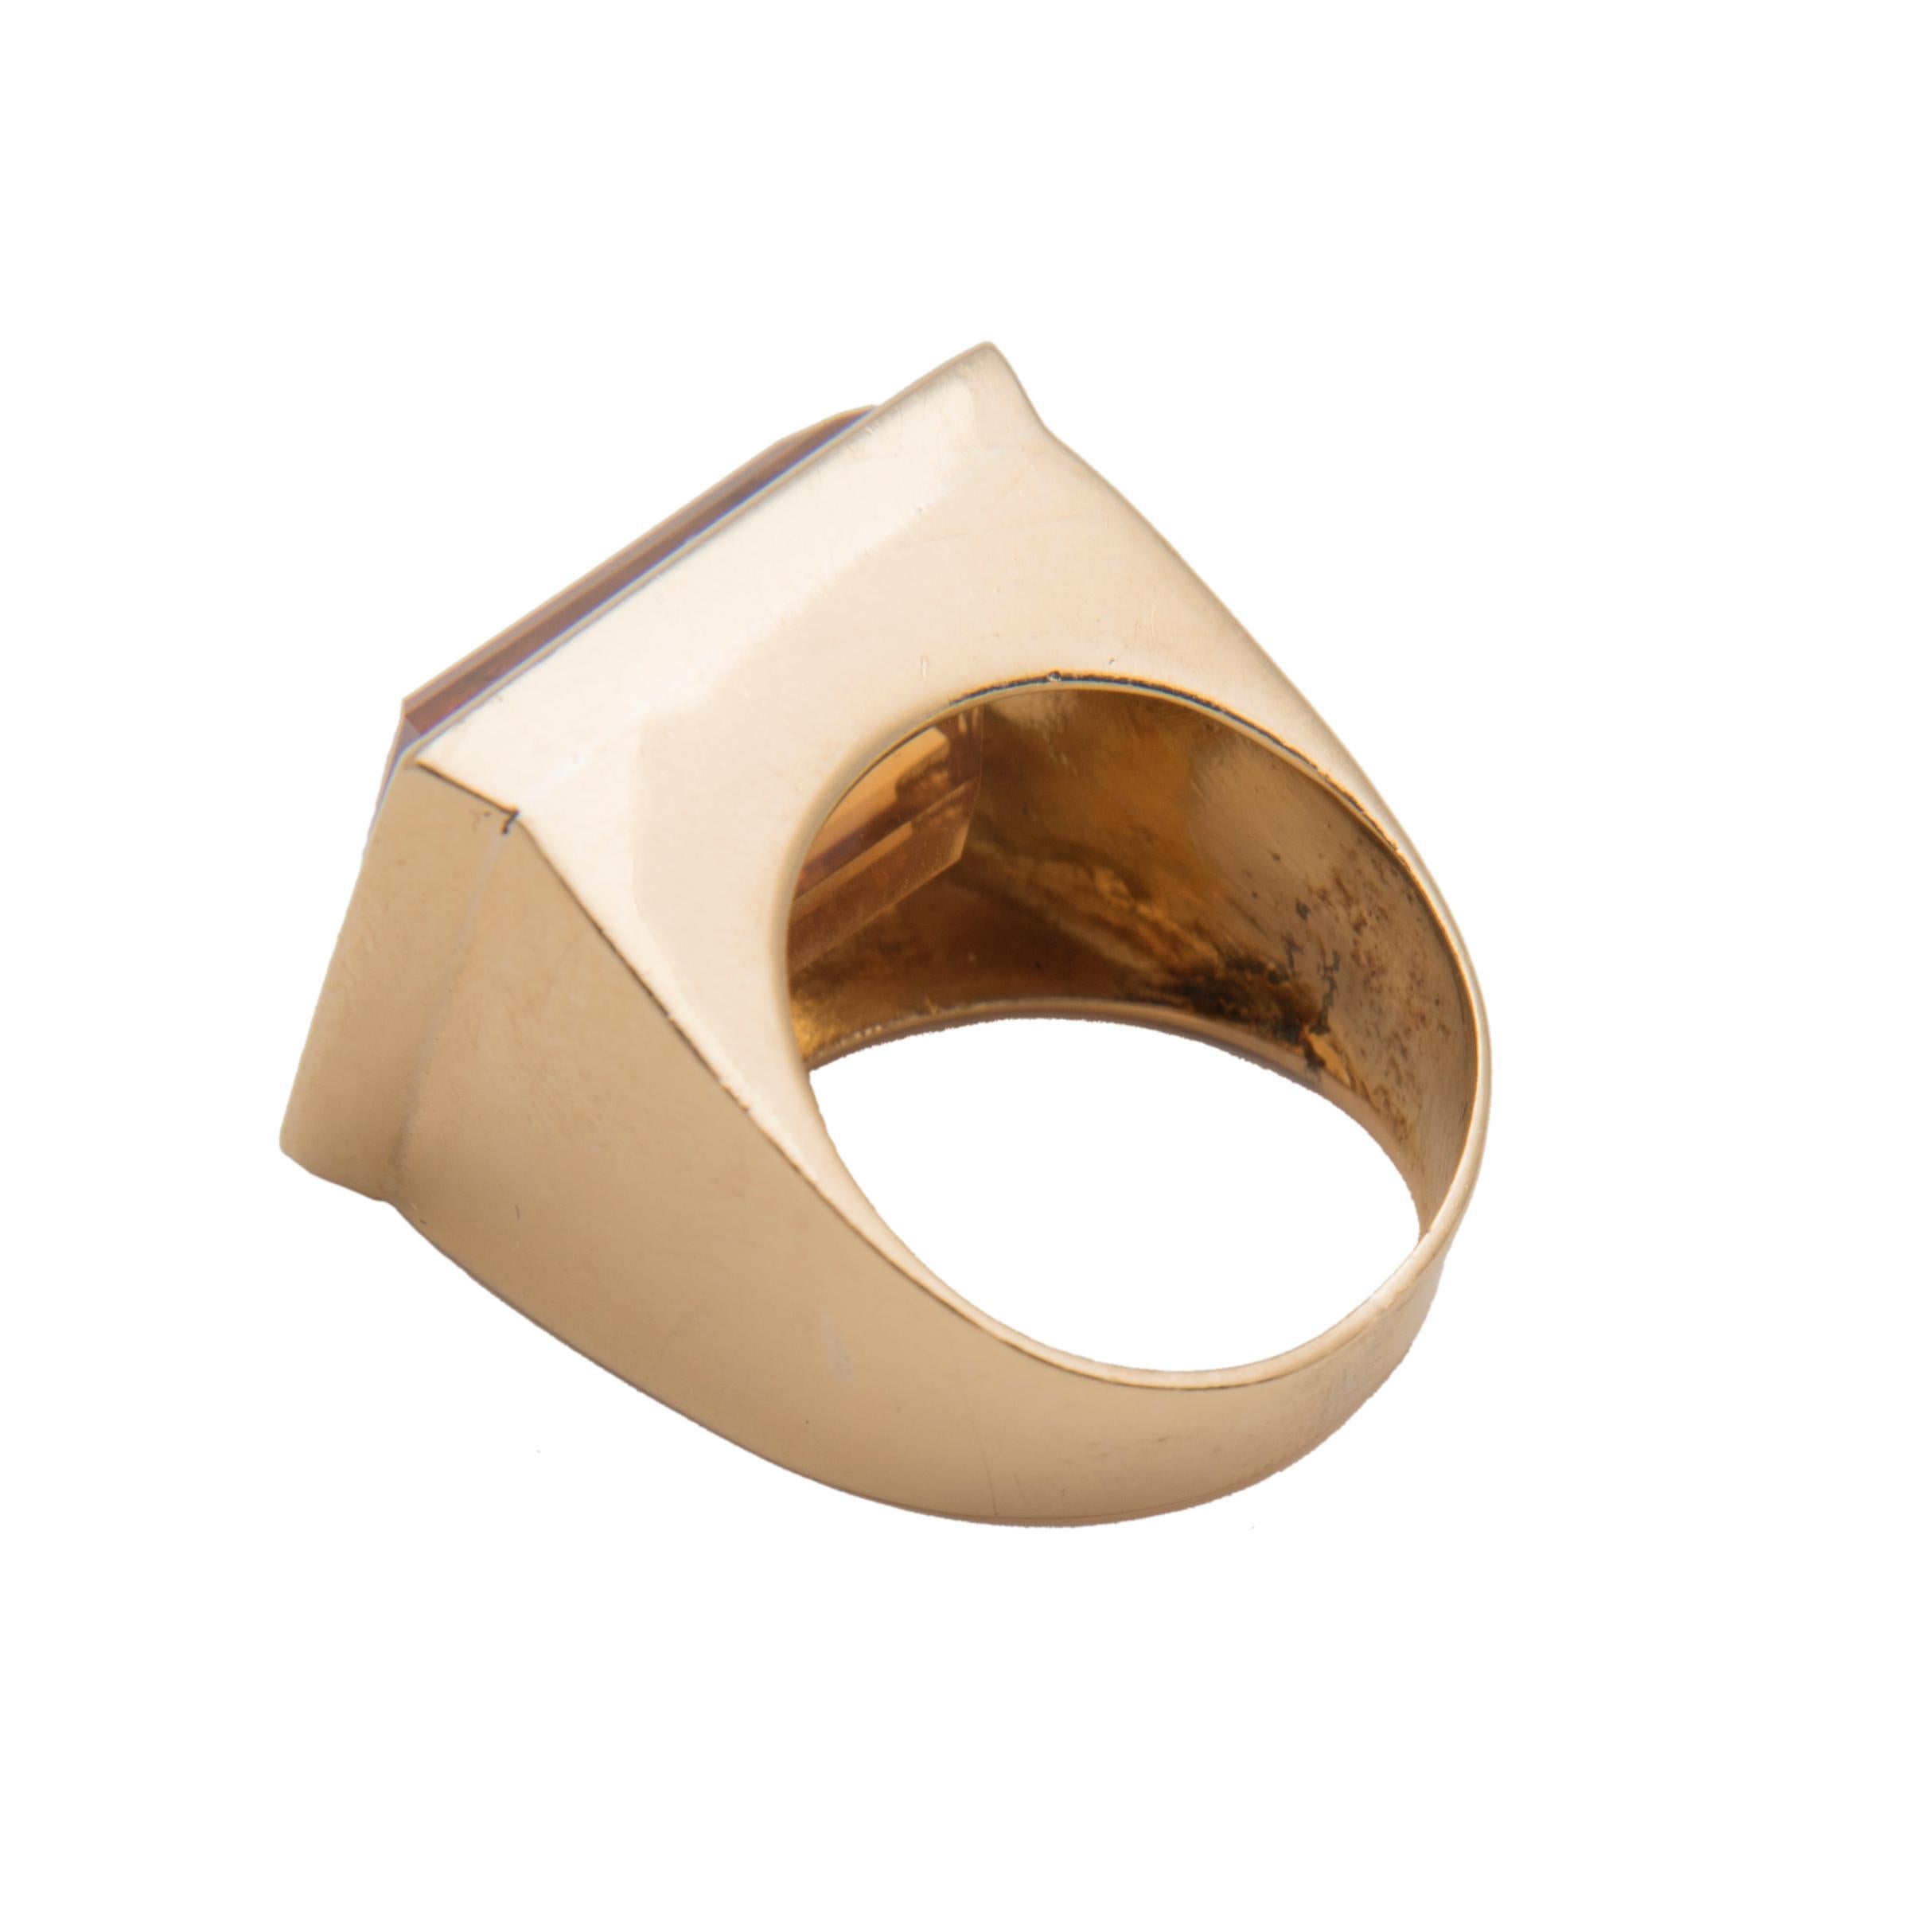 18k Yellow Gold Chevalliere Ring with a large rectangular citrine
Marked '750' and with makers mark
Size EU: 54, US: 6 3/4
Italy, 1970s
